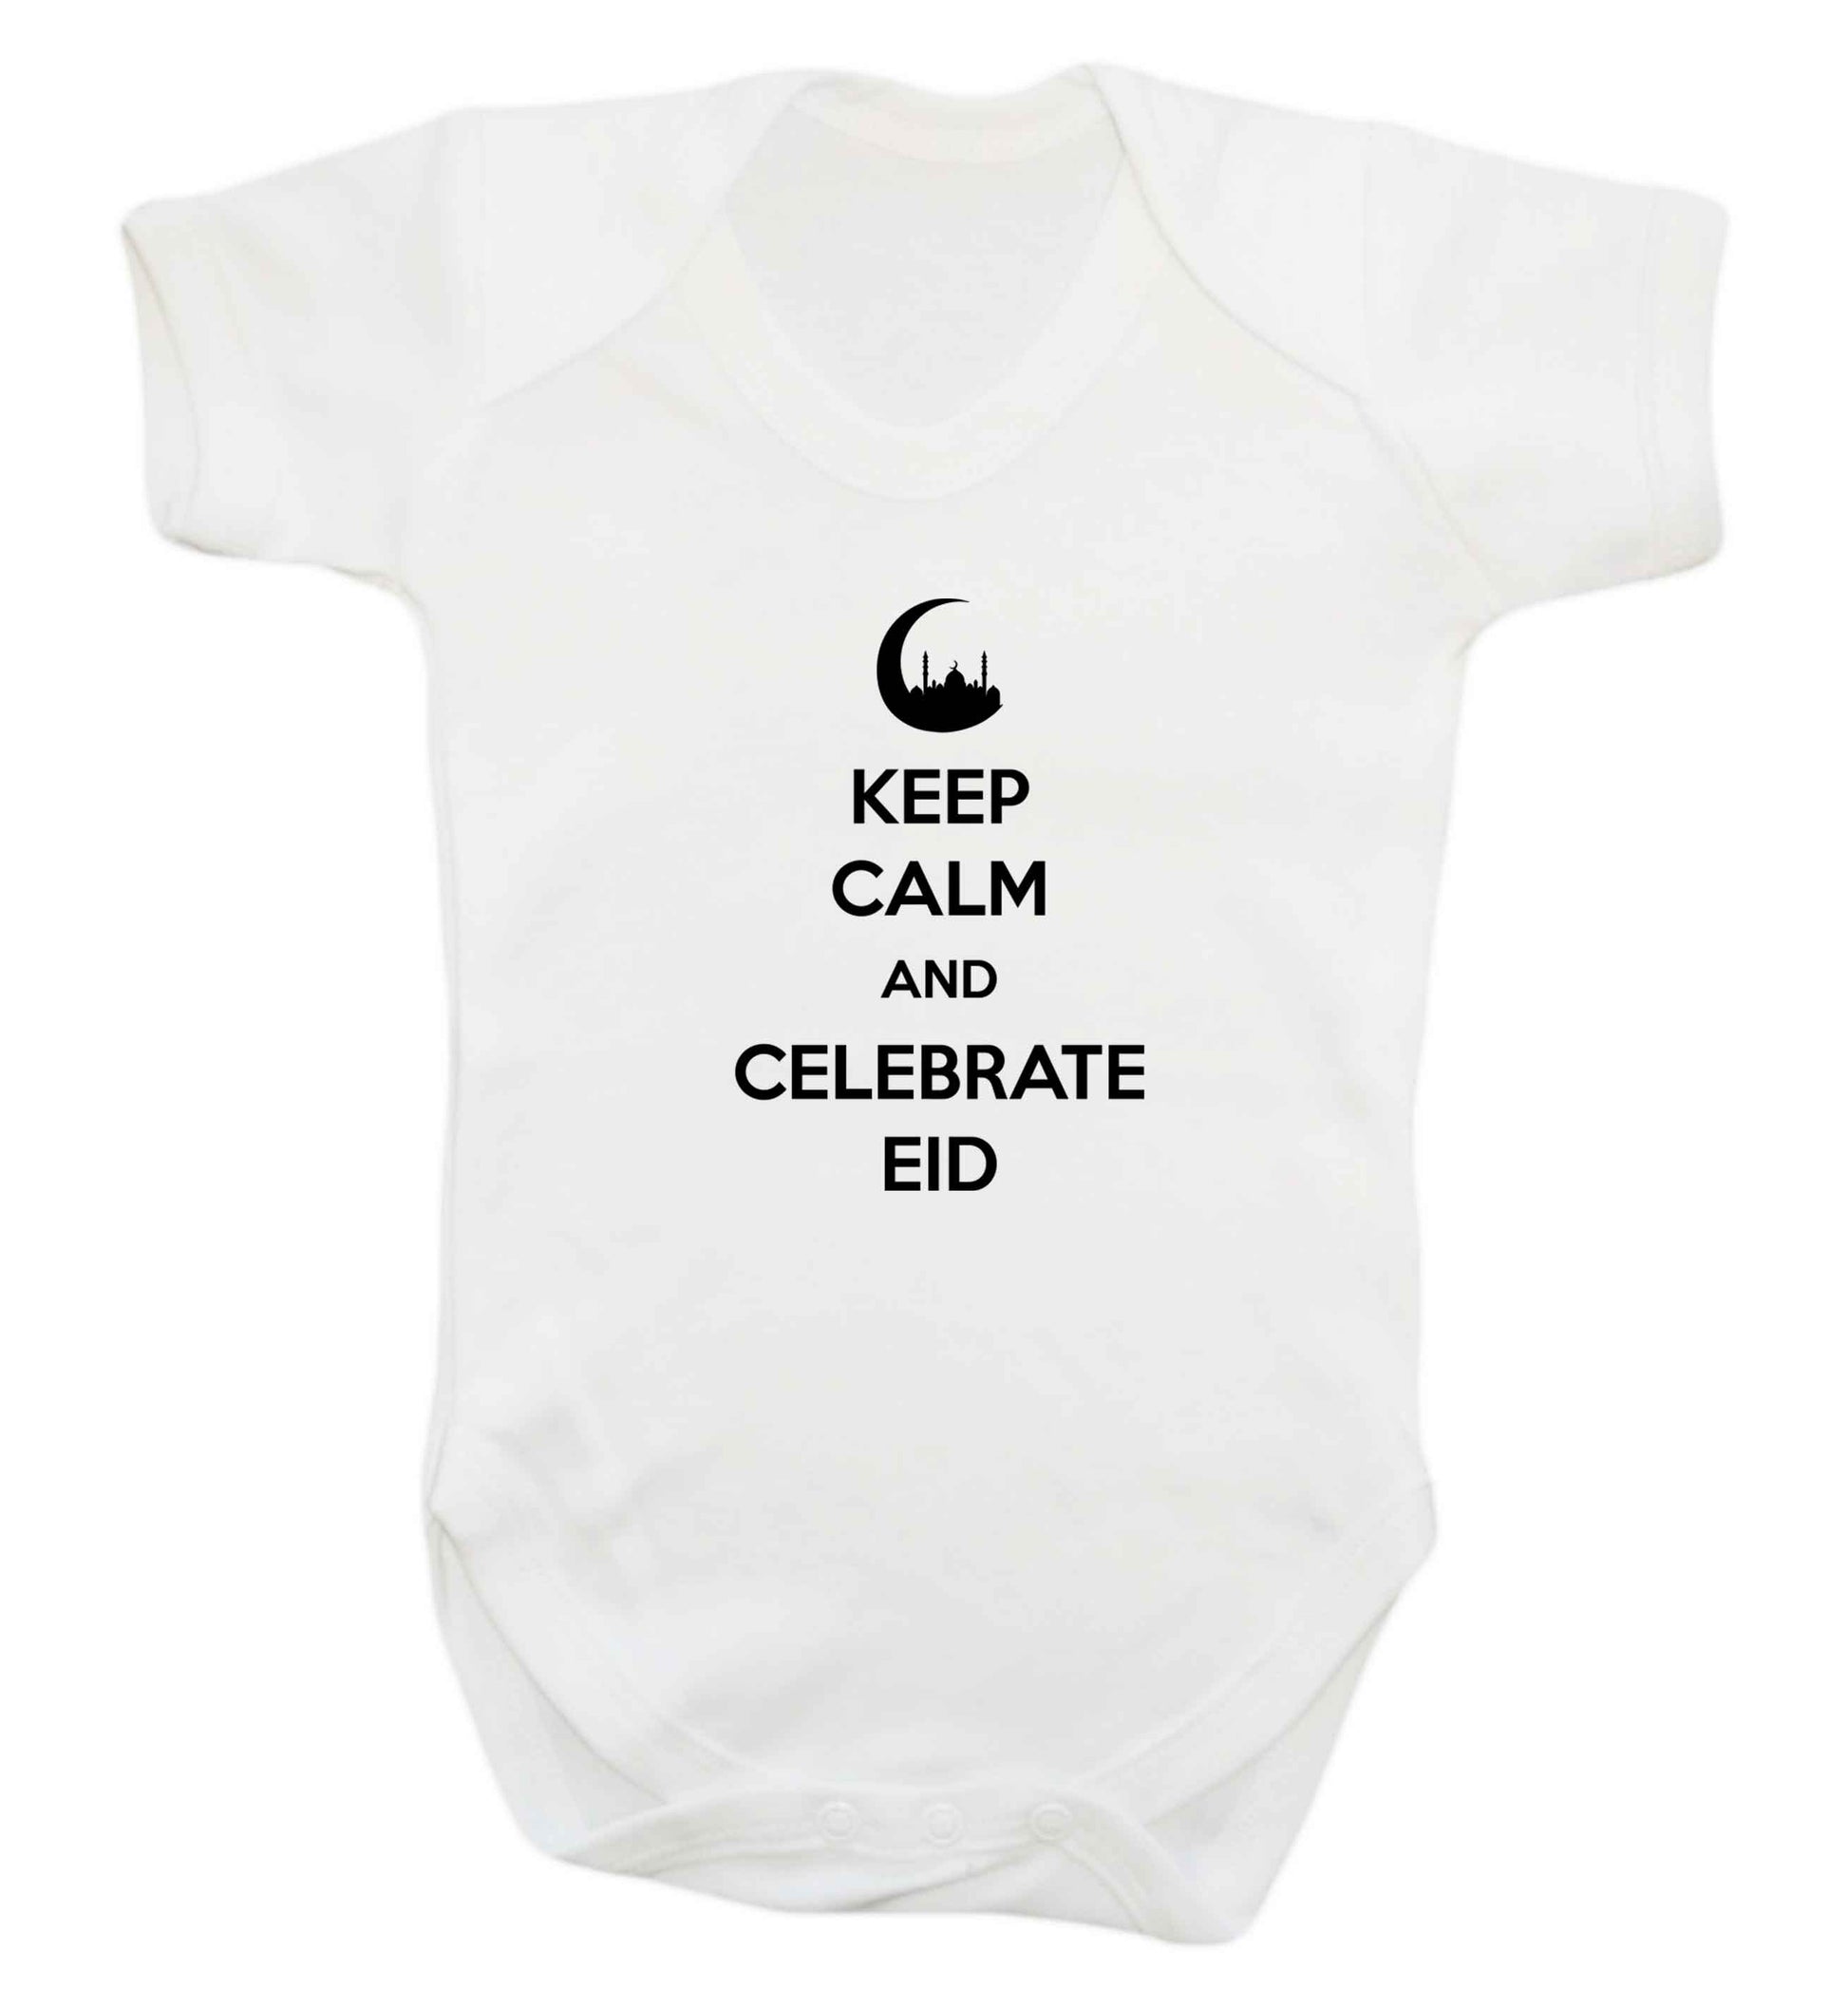 Keep calm and celebrate Eid baby vest white 18-24 months